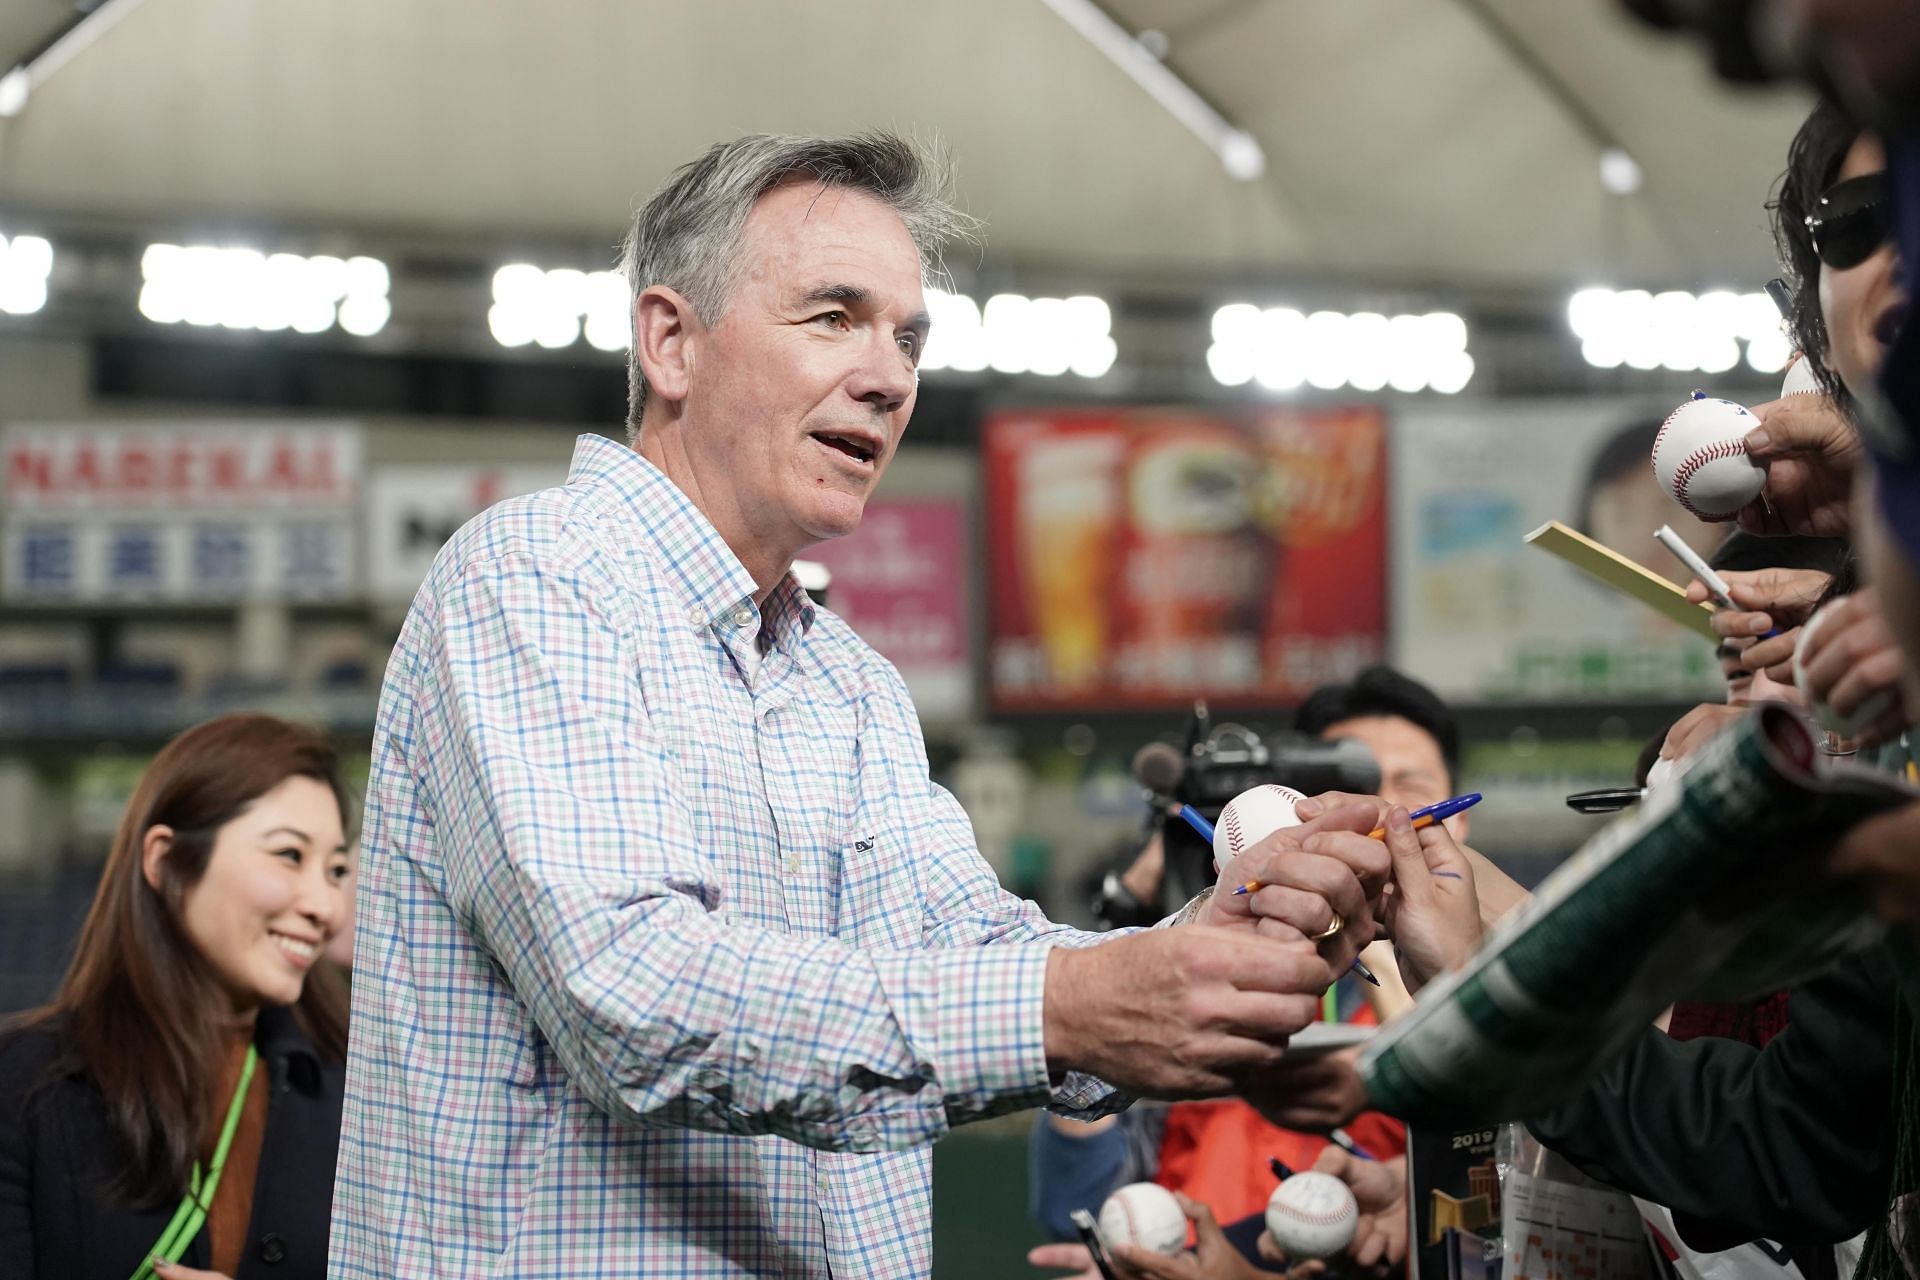 Billy Beane is Reportedly Finally Coming to Work at Fenway…to Build John  Henry's Soccer Empire